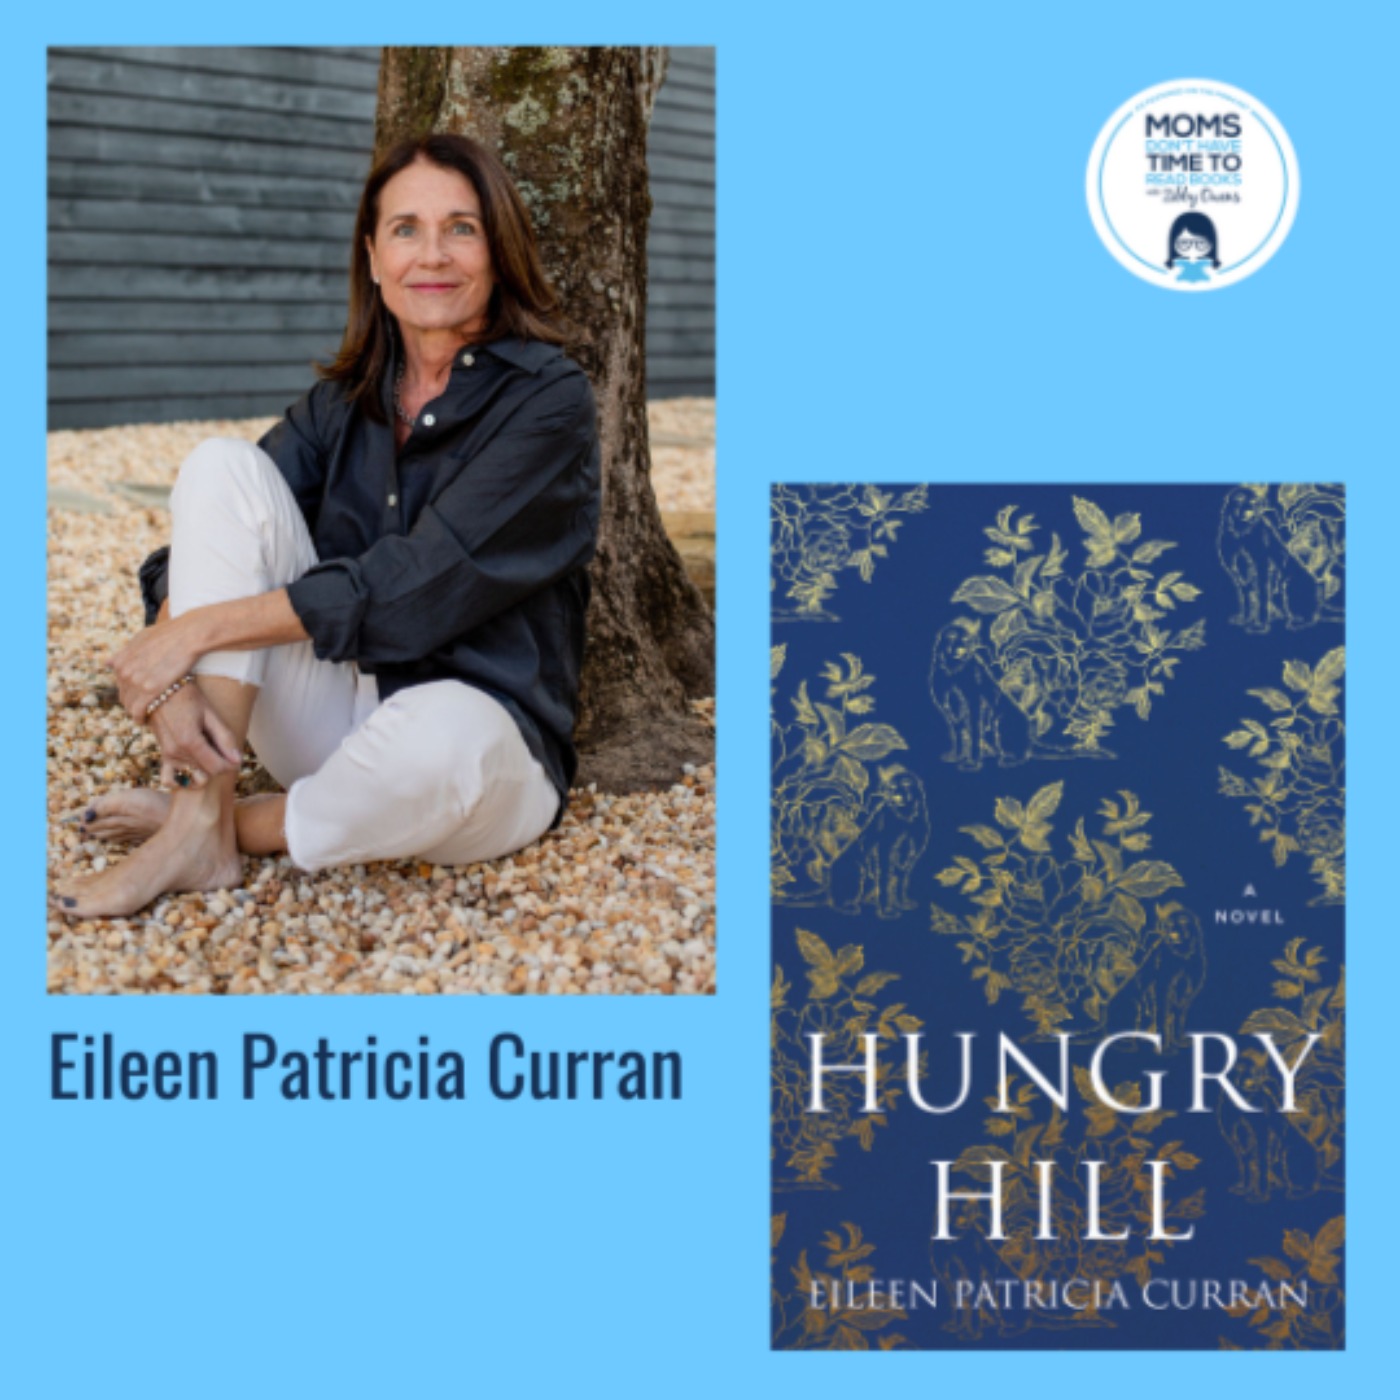 Eileen Patricia Curran, HUNGRY HILL